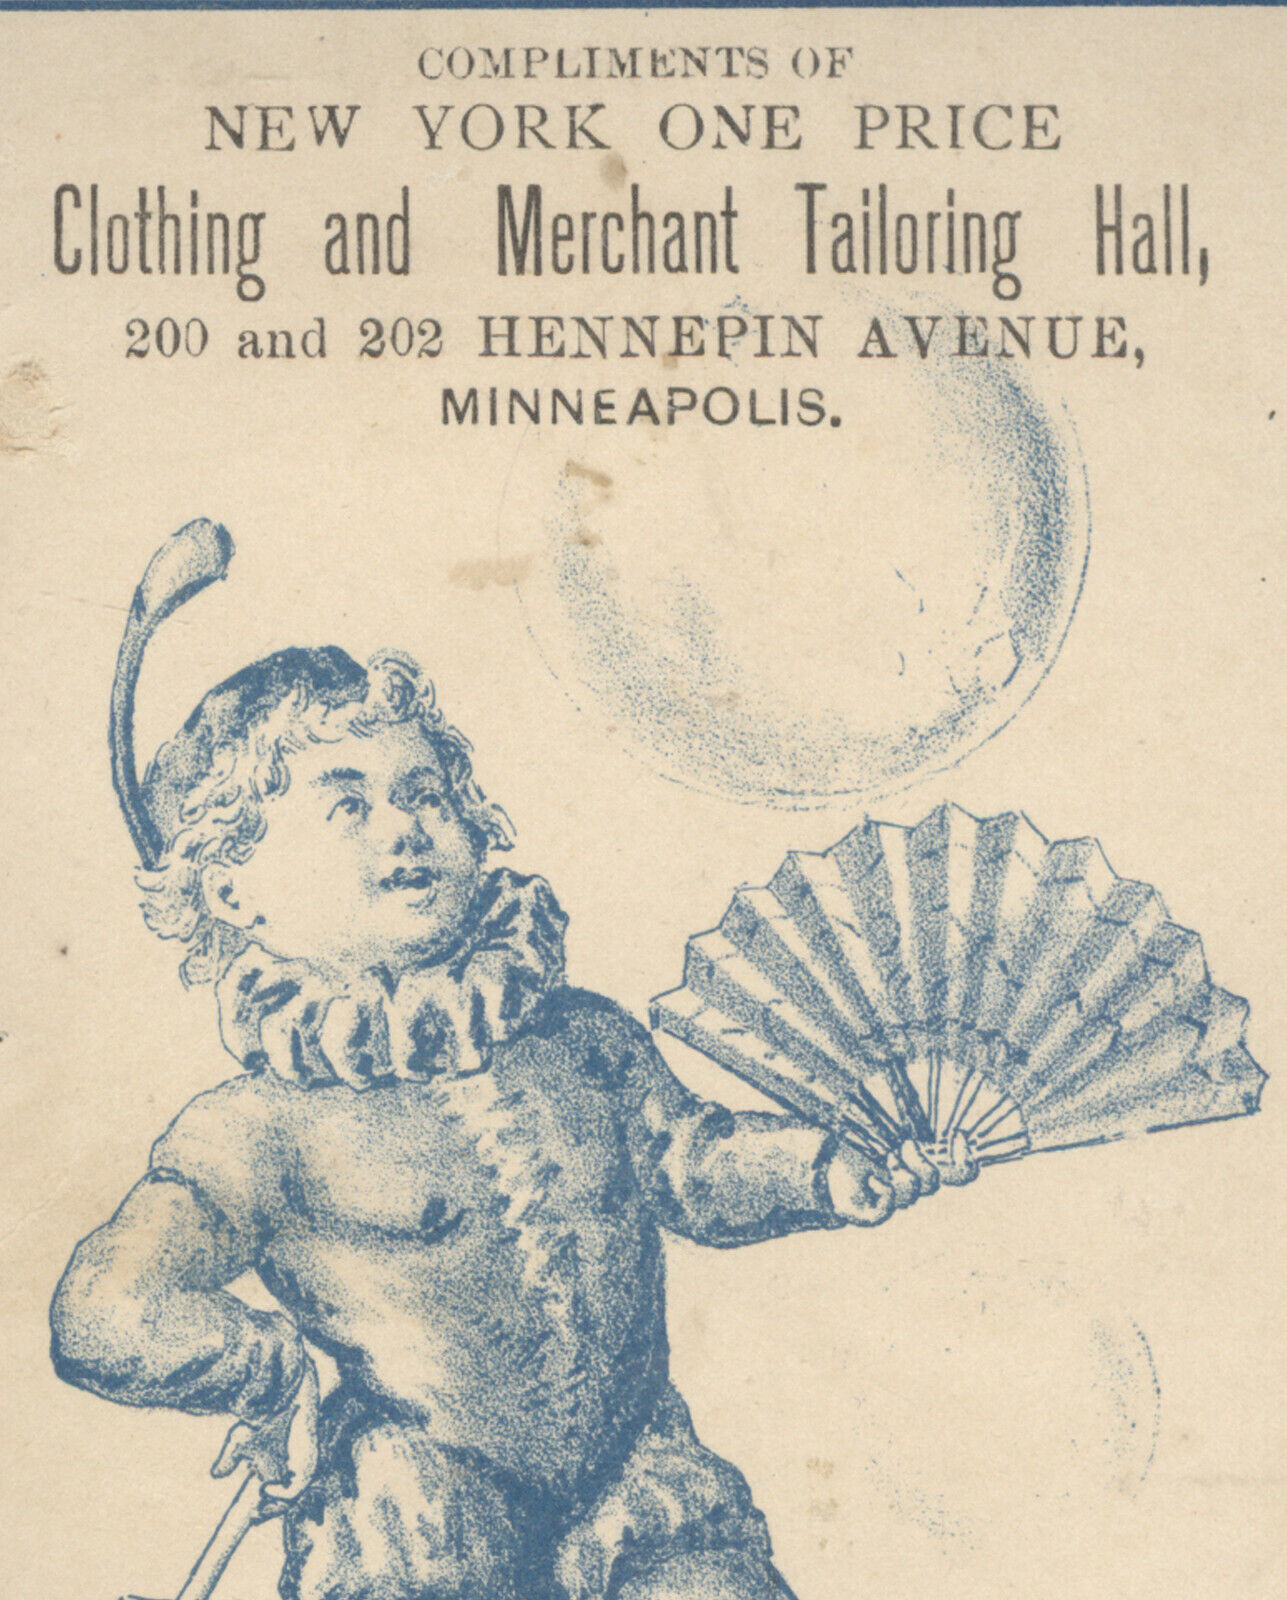 MINNEAPOLIS MN TRADE CARD, NY ONE PRICE CLOTHING & MERCHANT TAILORING HALL  F265